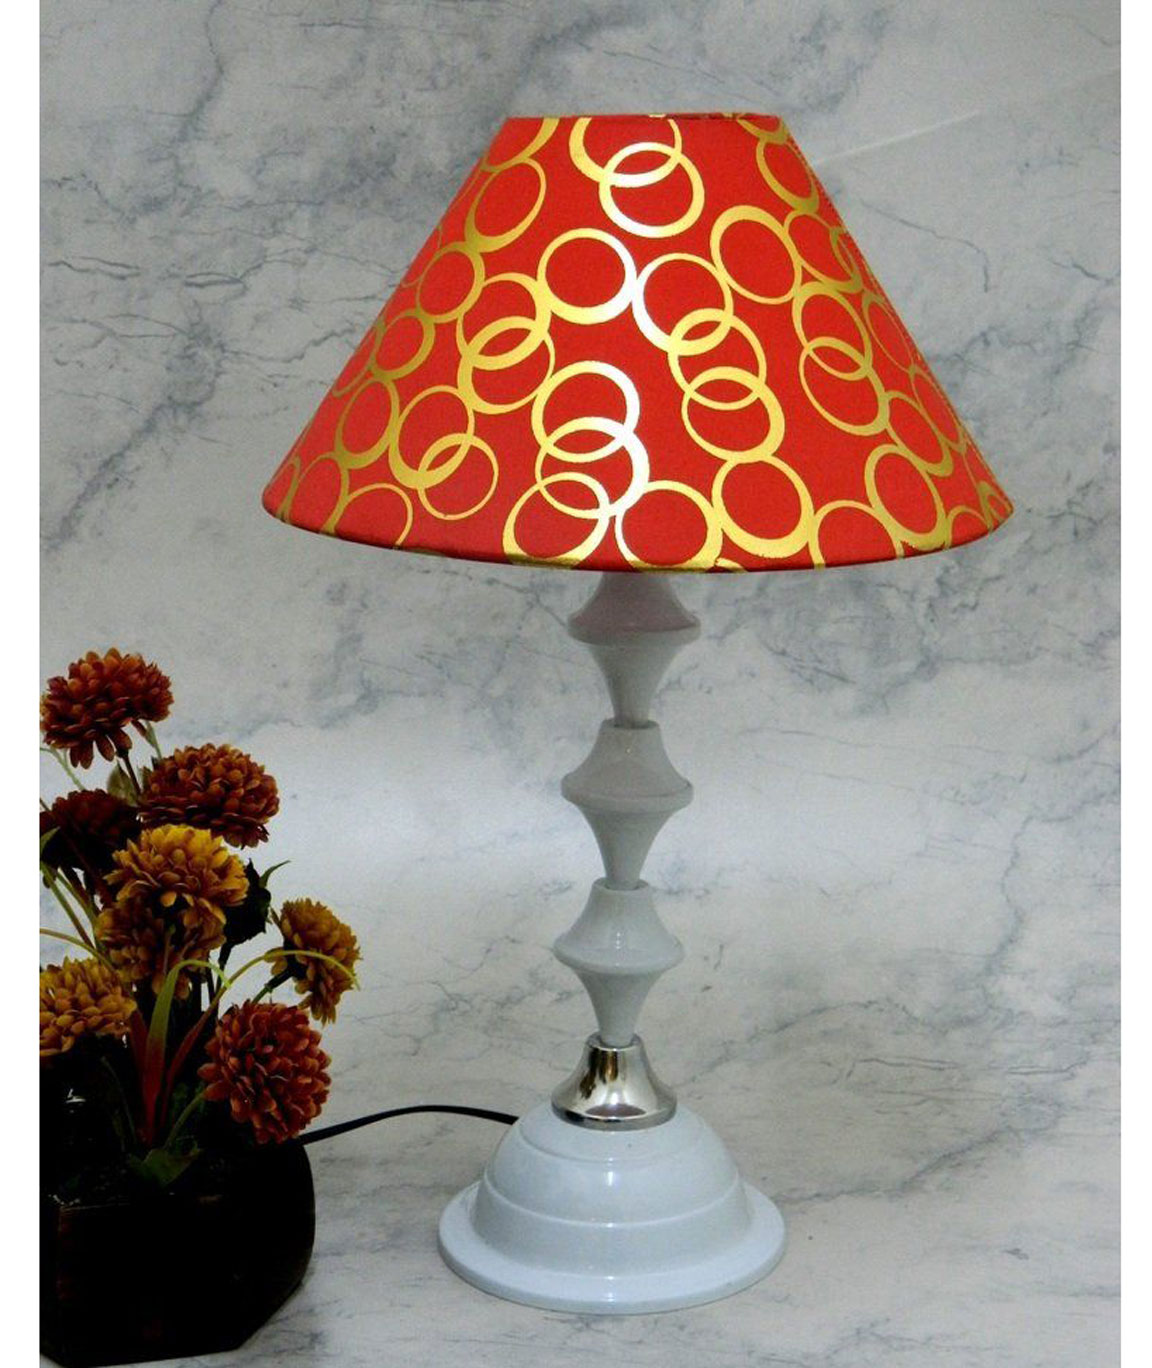 RDC White Silver Table Lamp with 10 Inches Round Red Silver Polka Dots Designer Lamp Shade